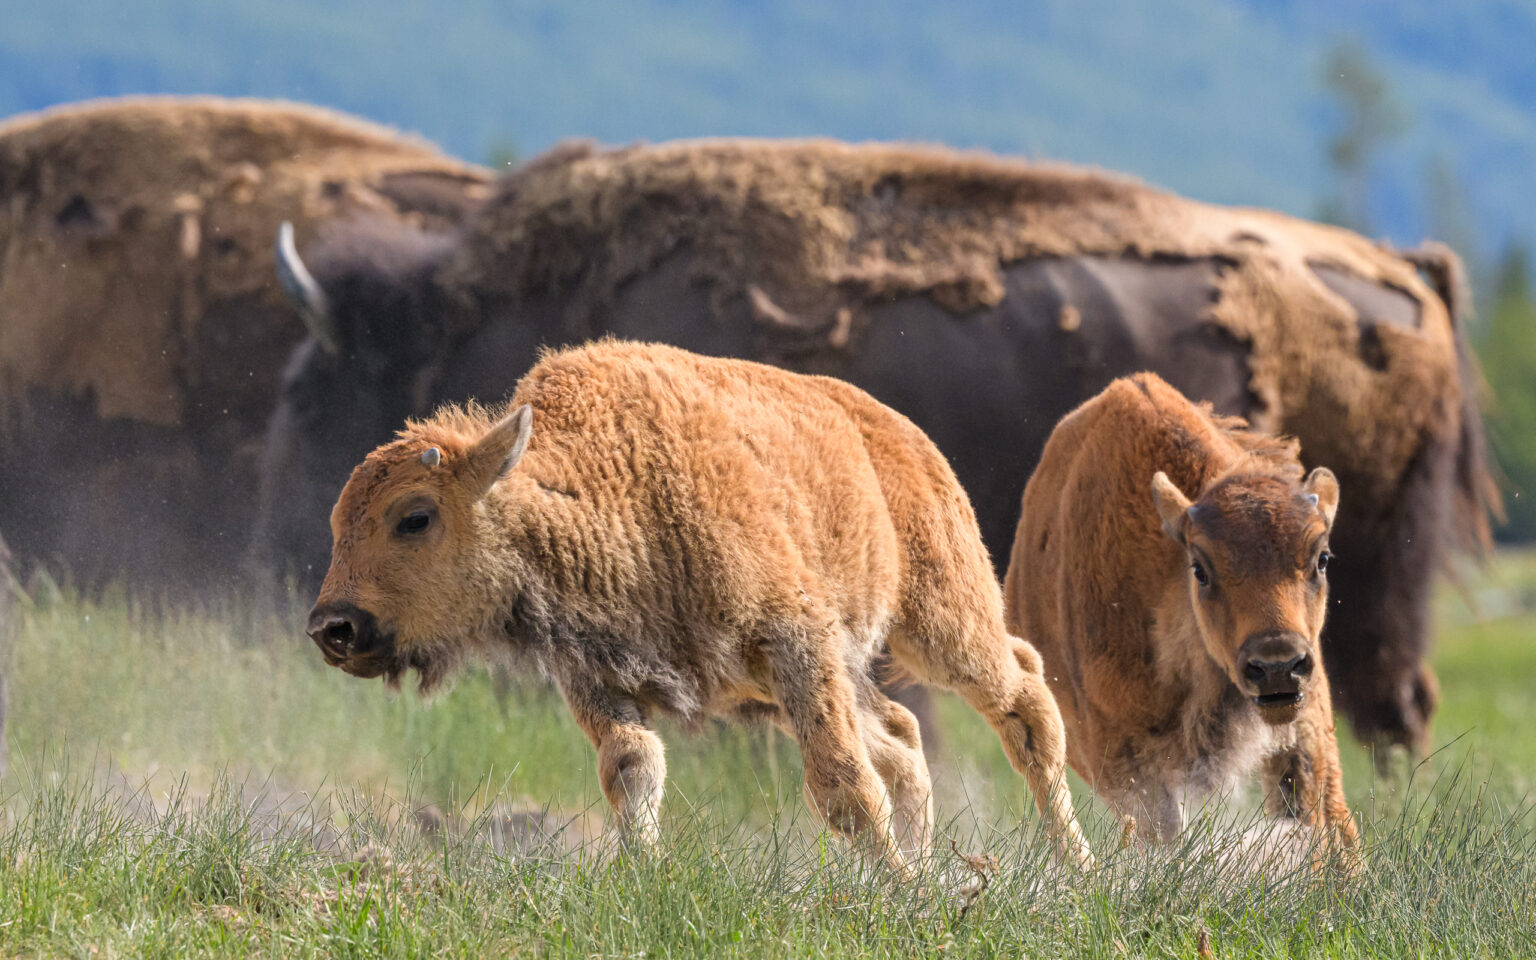 Two bison calves chasing in Yellowstone National Park